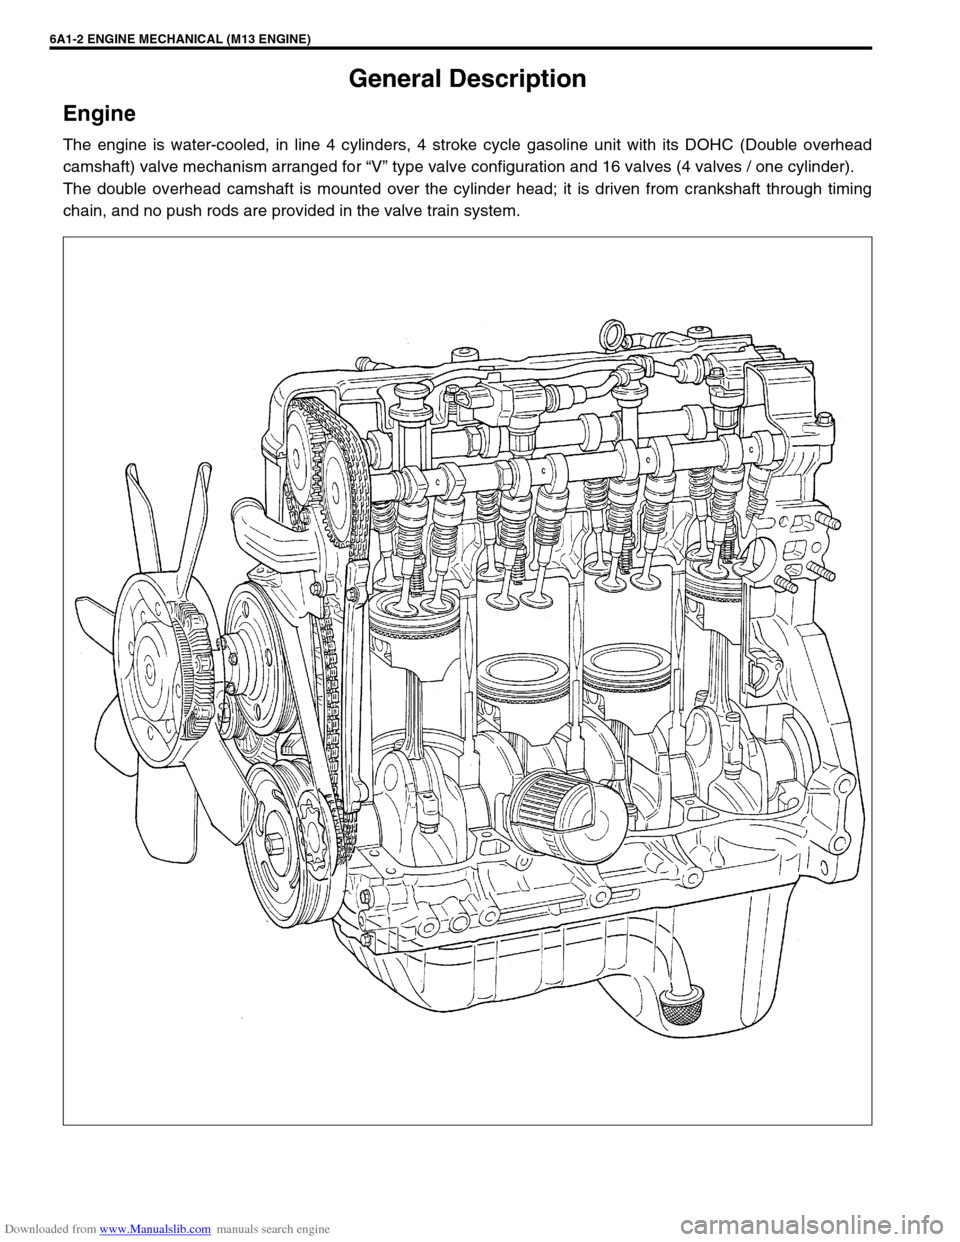 SUZUKI JIMNY 2005 3.G Service Workshop Manual Downloaded from www.Manualslib.com manuals search engine 6A1-2 ENGINE MECHANICAL (M13 ENGINE)
General Description
Engine
The engine is water-cooled, in line 4 cylinders, 4 stroke cycle gasoline unit w